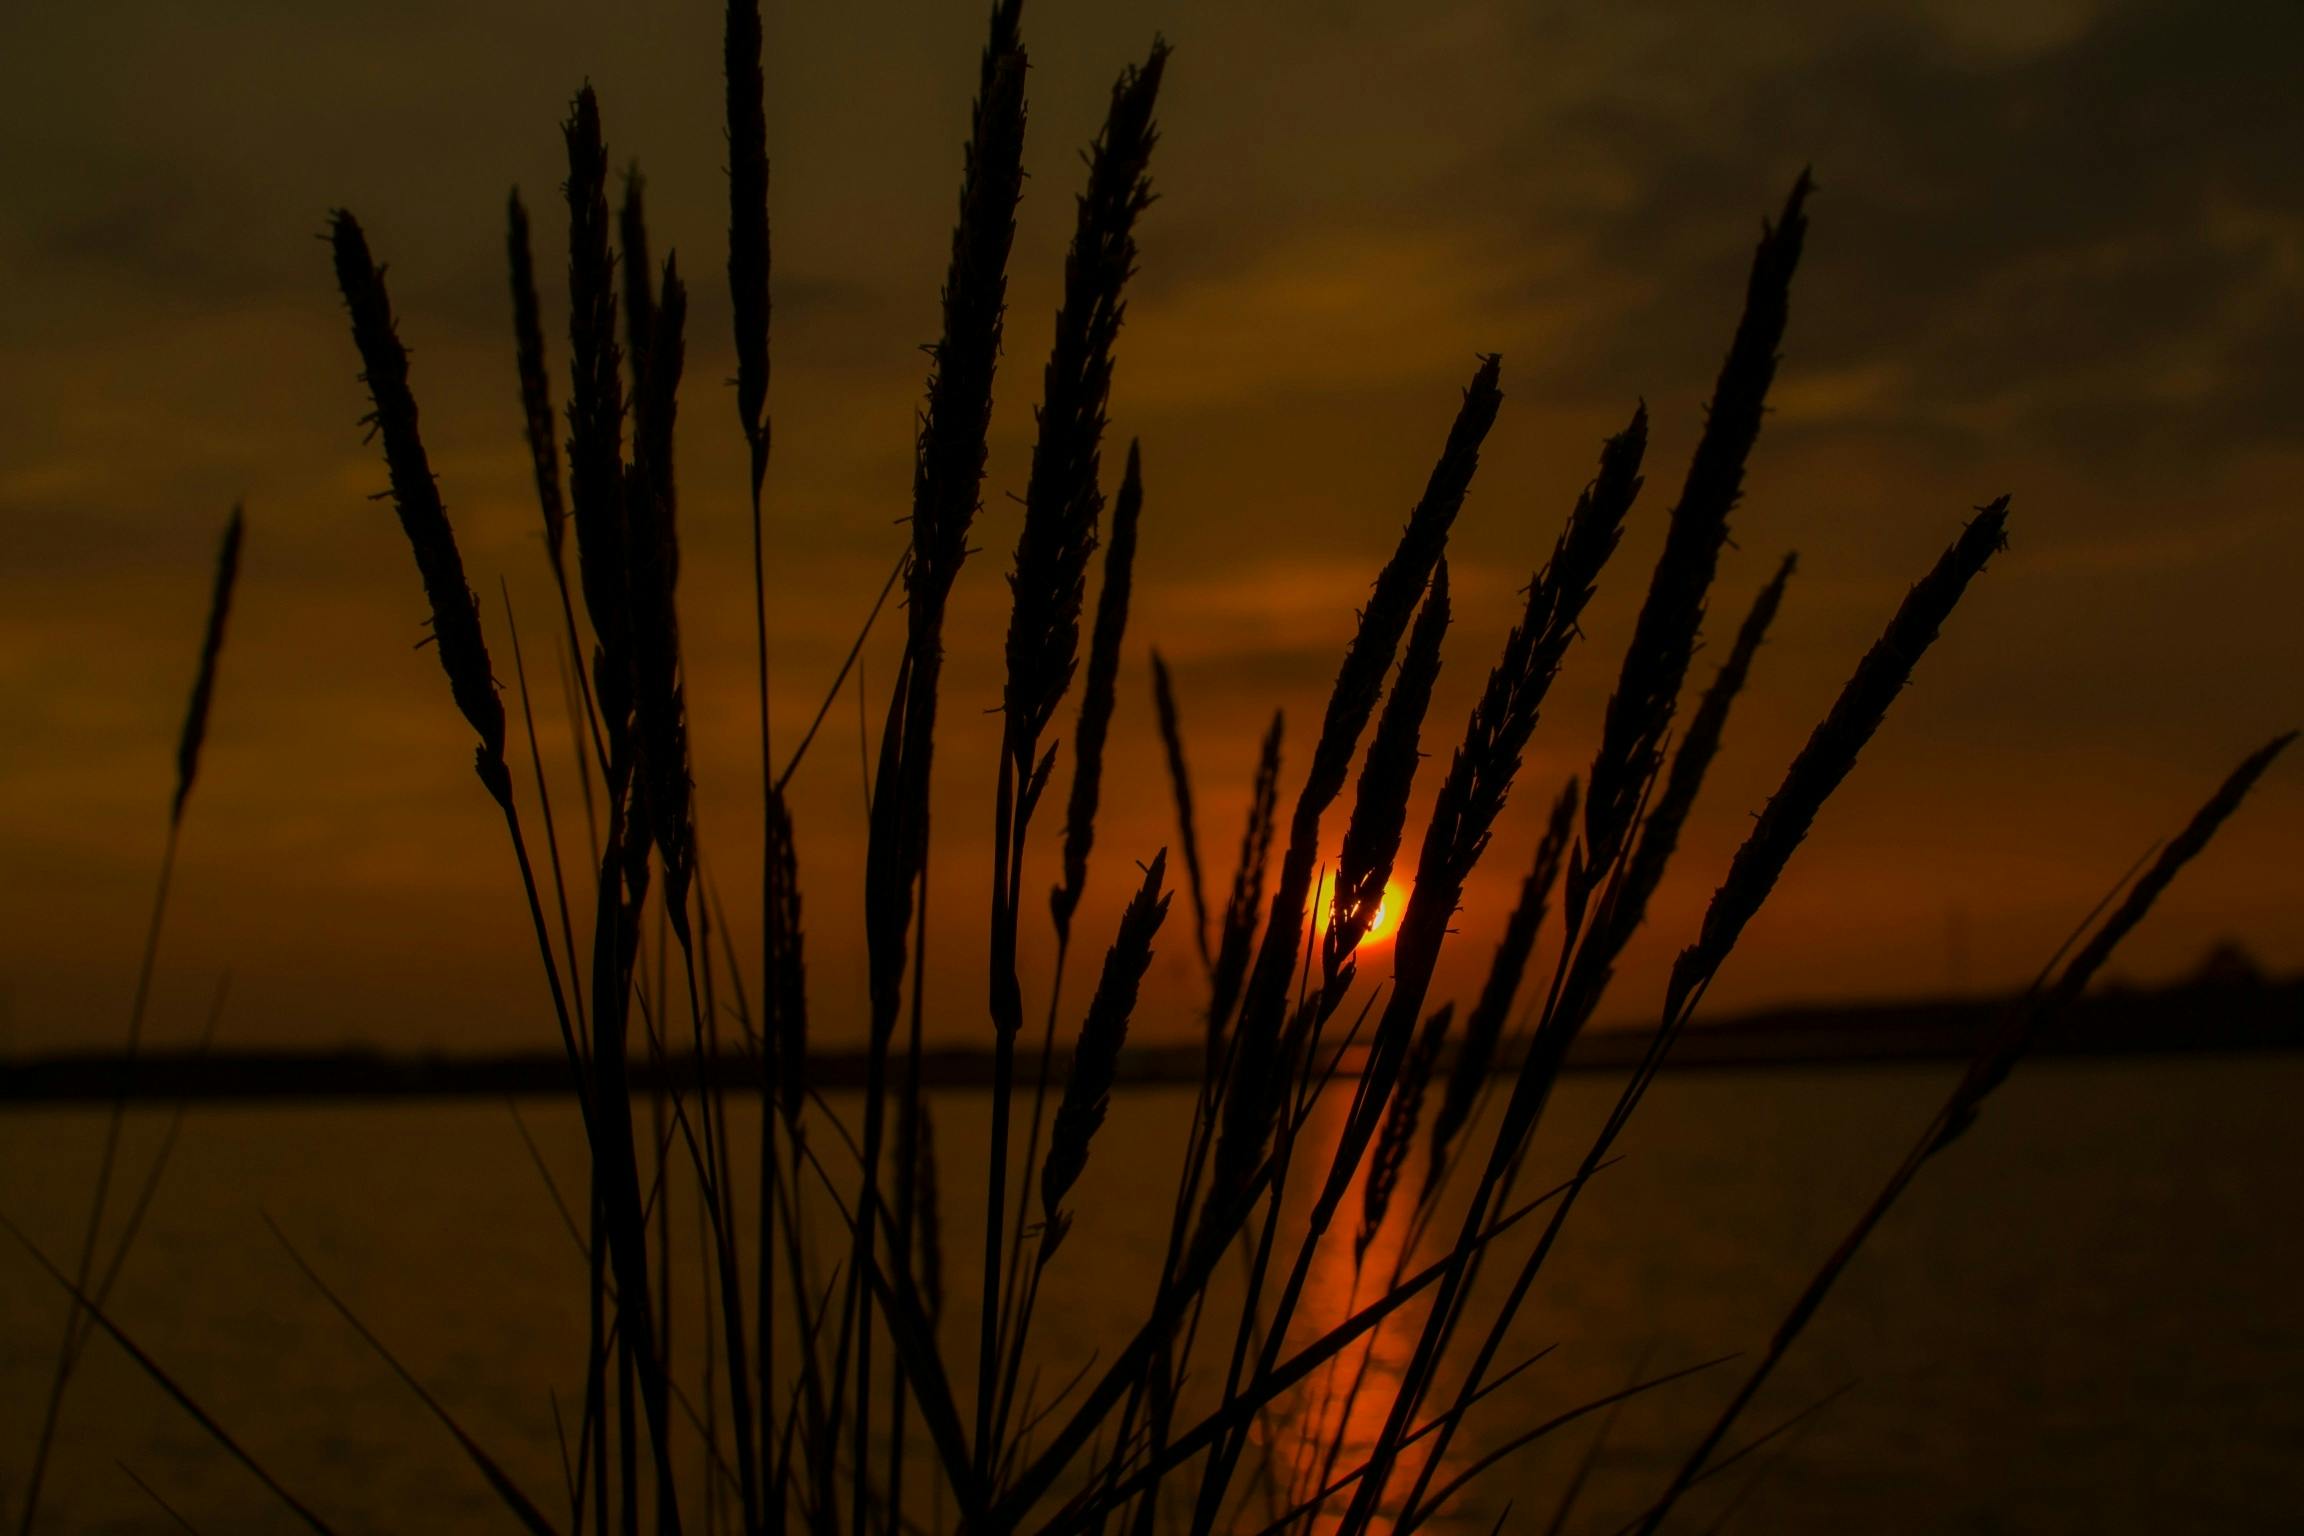 the sun is setting over a body of water, art photography, orange grass, night time photograph, trending photo, fan favorite